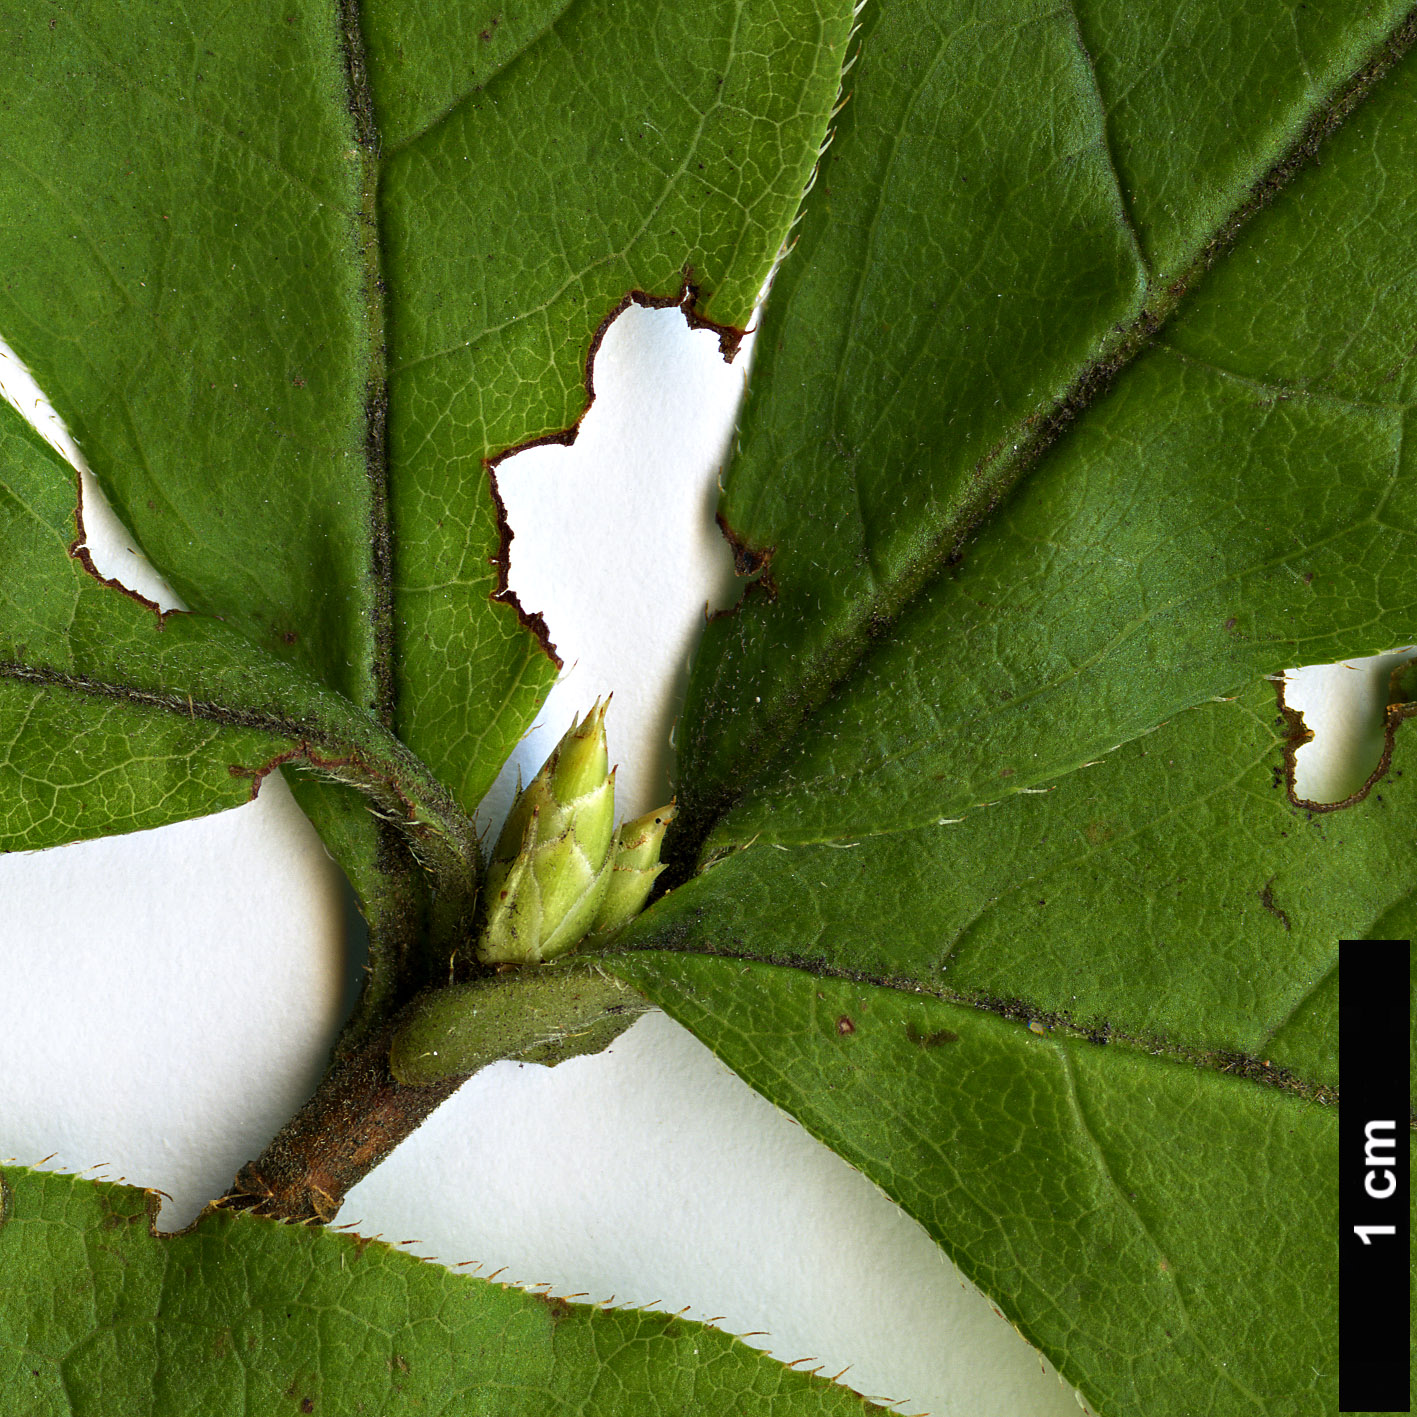 High resolution image: Family: Ericaceae - Genus: Rhododendron - Taxon: calendulaceum